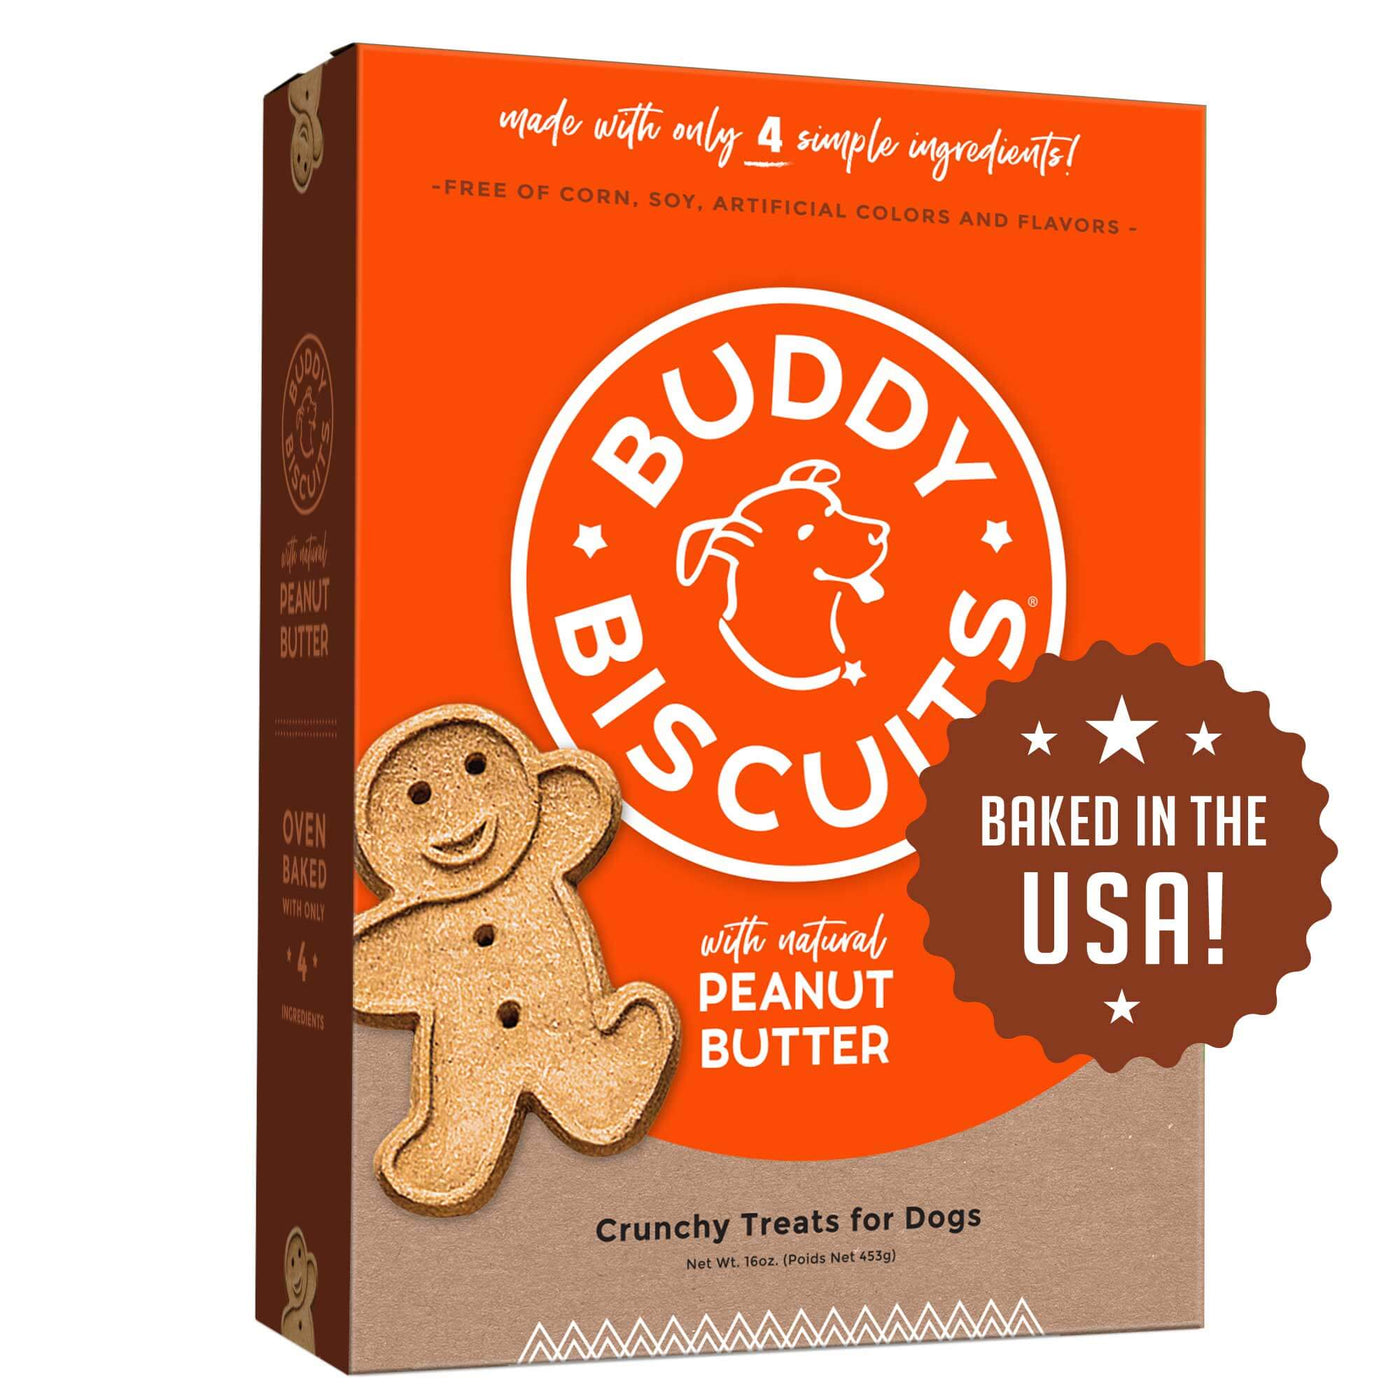 Peanut Butter Healthy Whole Grain Oven Baked Dog Treats - Buddy Biscuits - PetToba-Buddy Biscuits